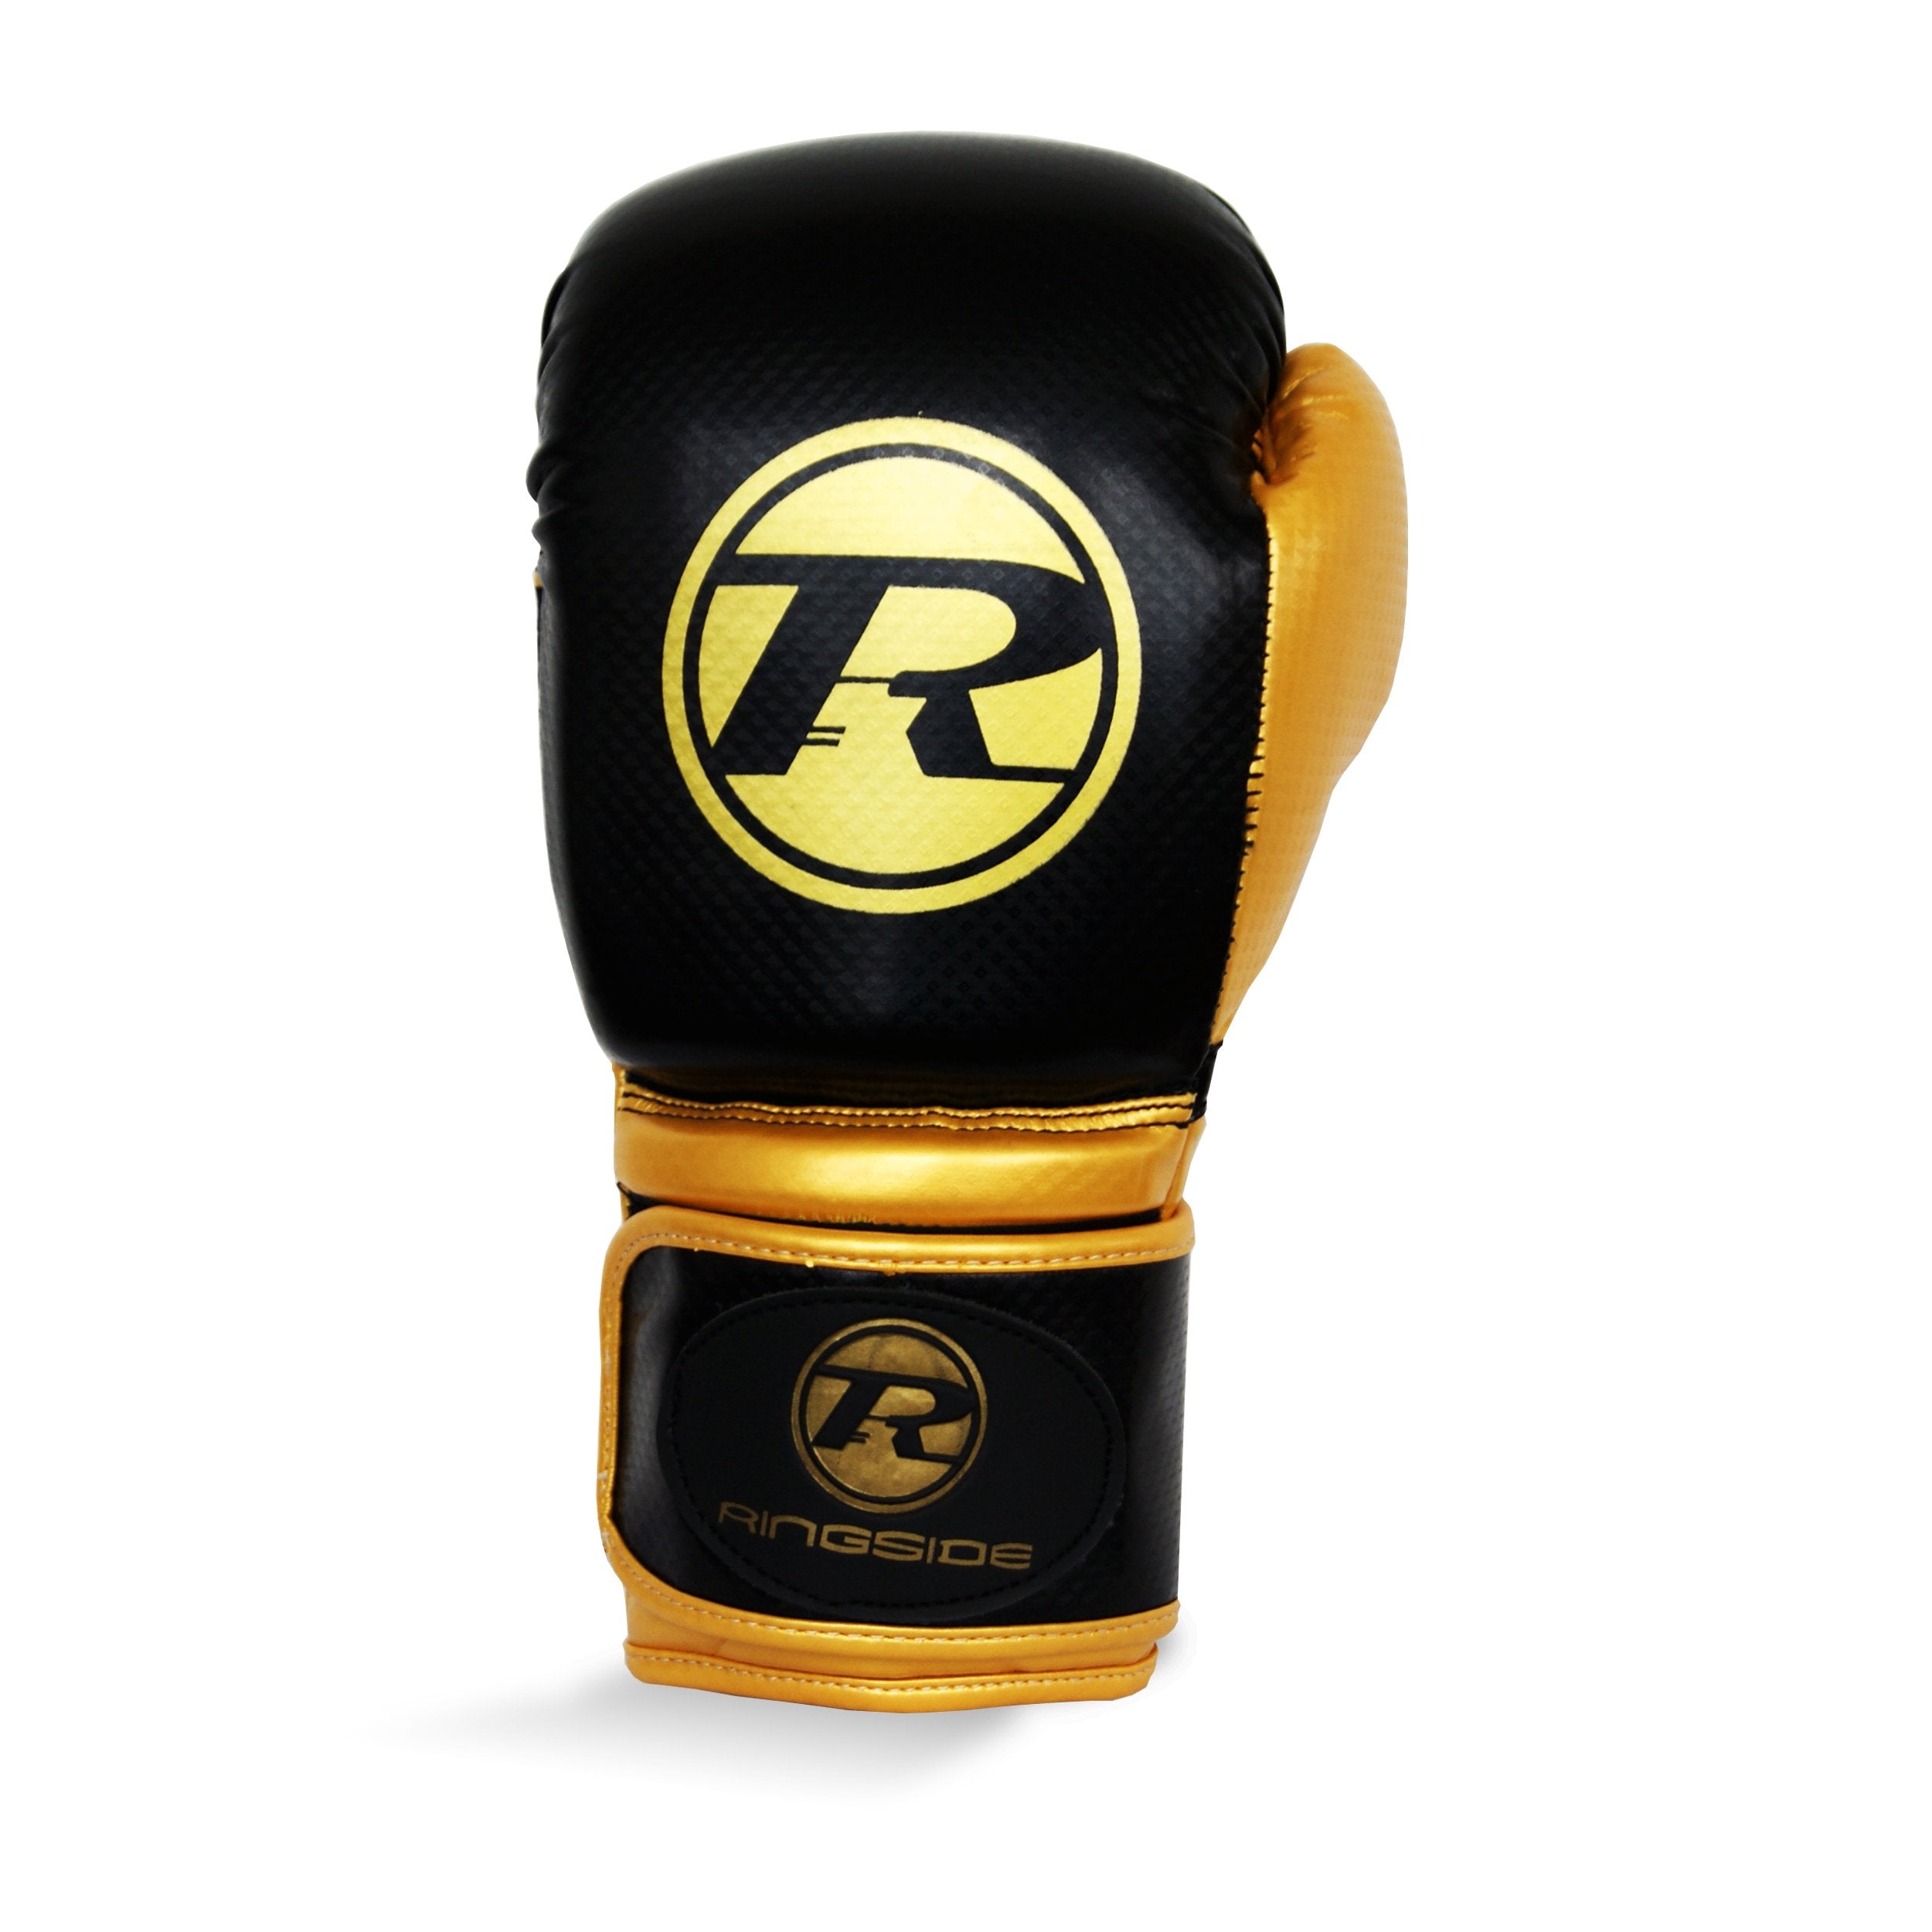 Pro Fitness Synthetic Leather Boxing Glove Metallic Black / Gold